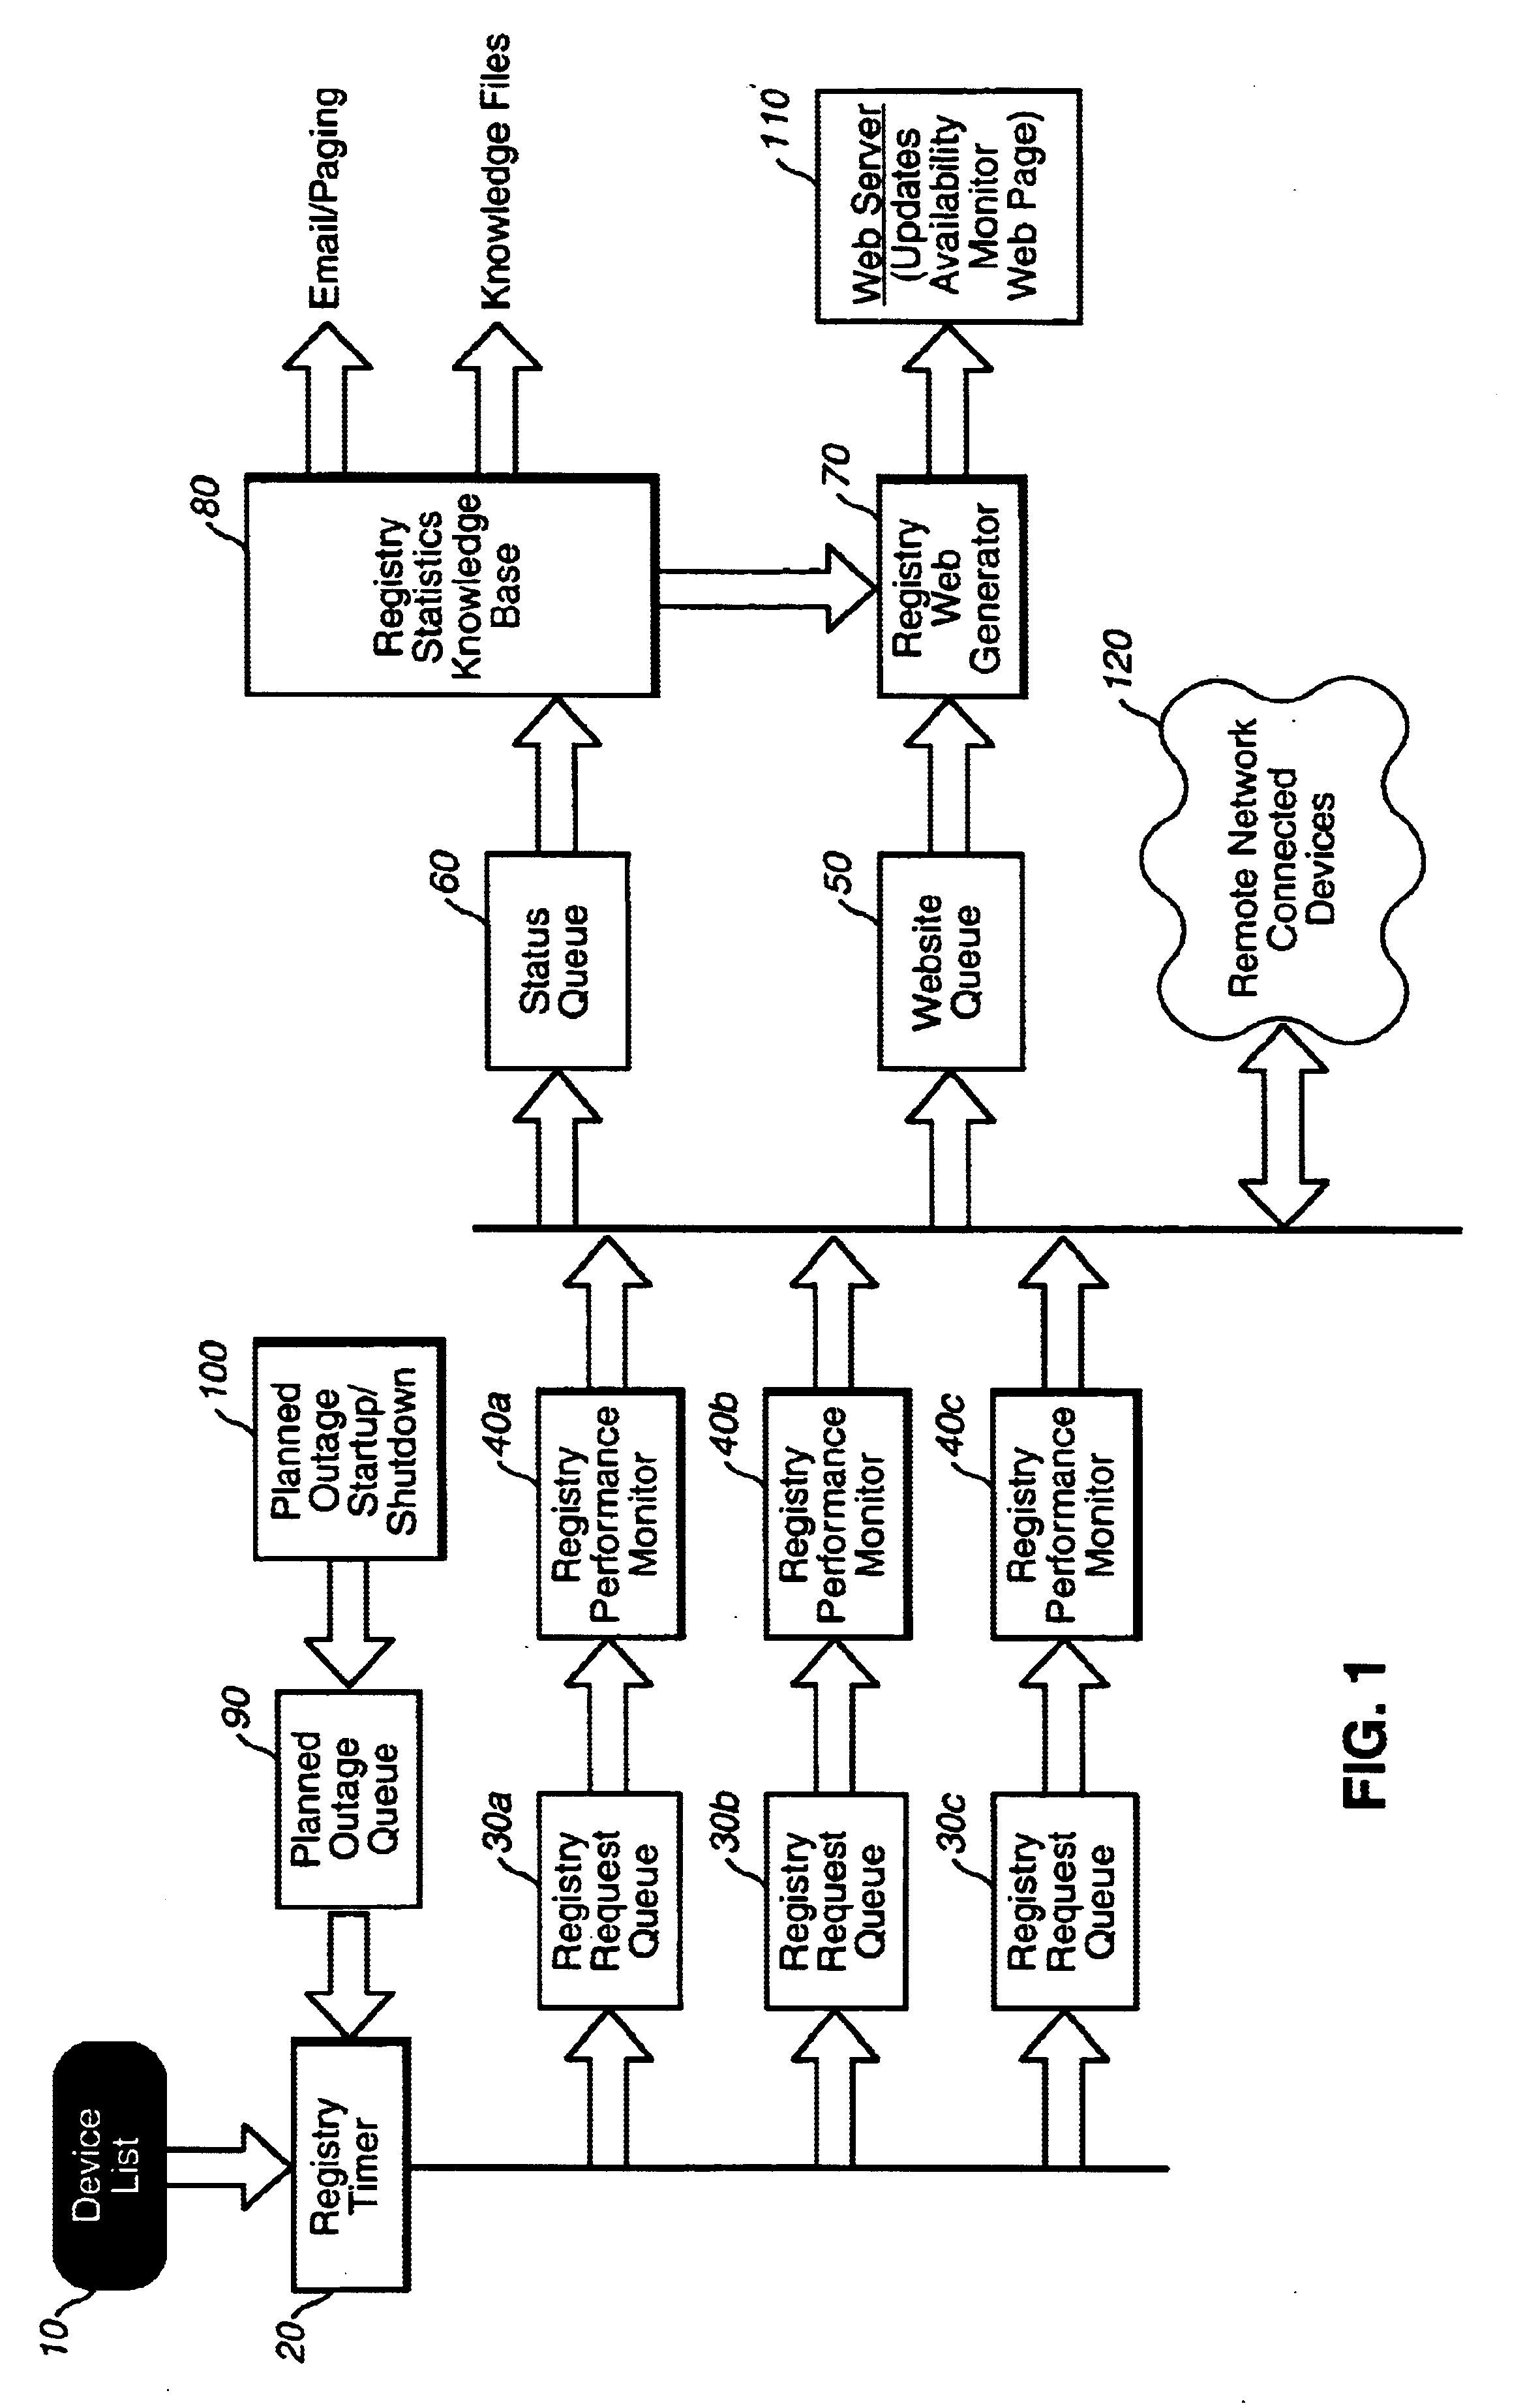 Method of monitoring the availability of a messaging and VOIP networking